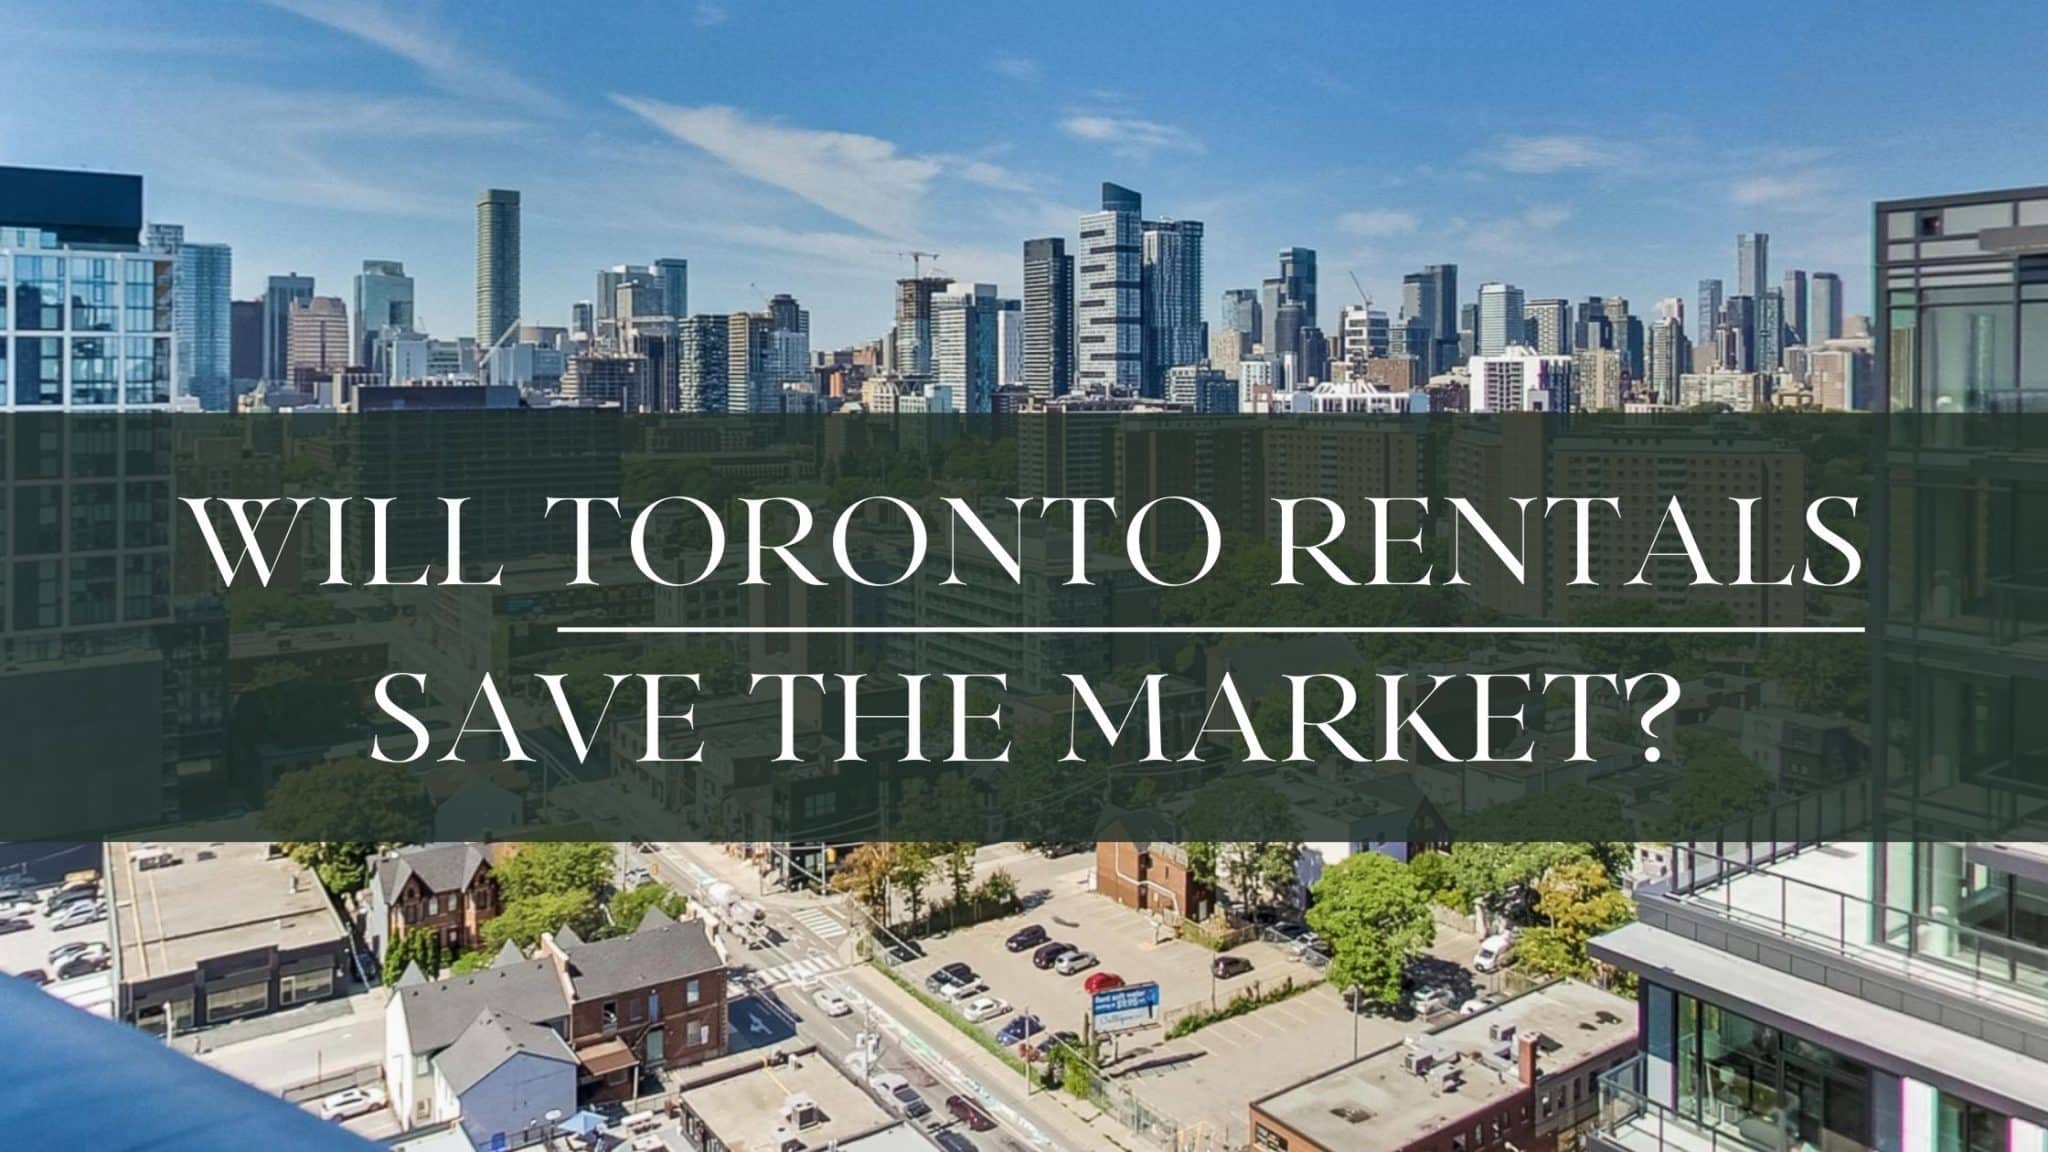 Toronto Rentals will they save the real estate market?